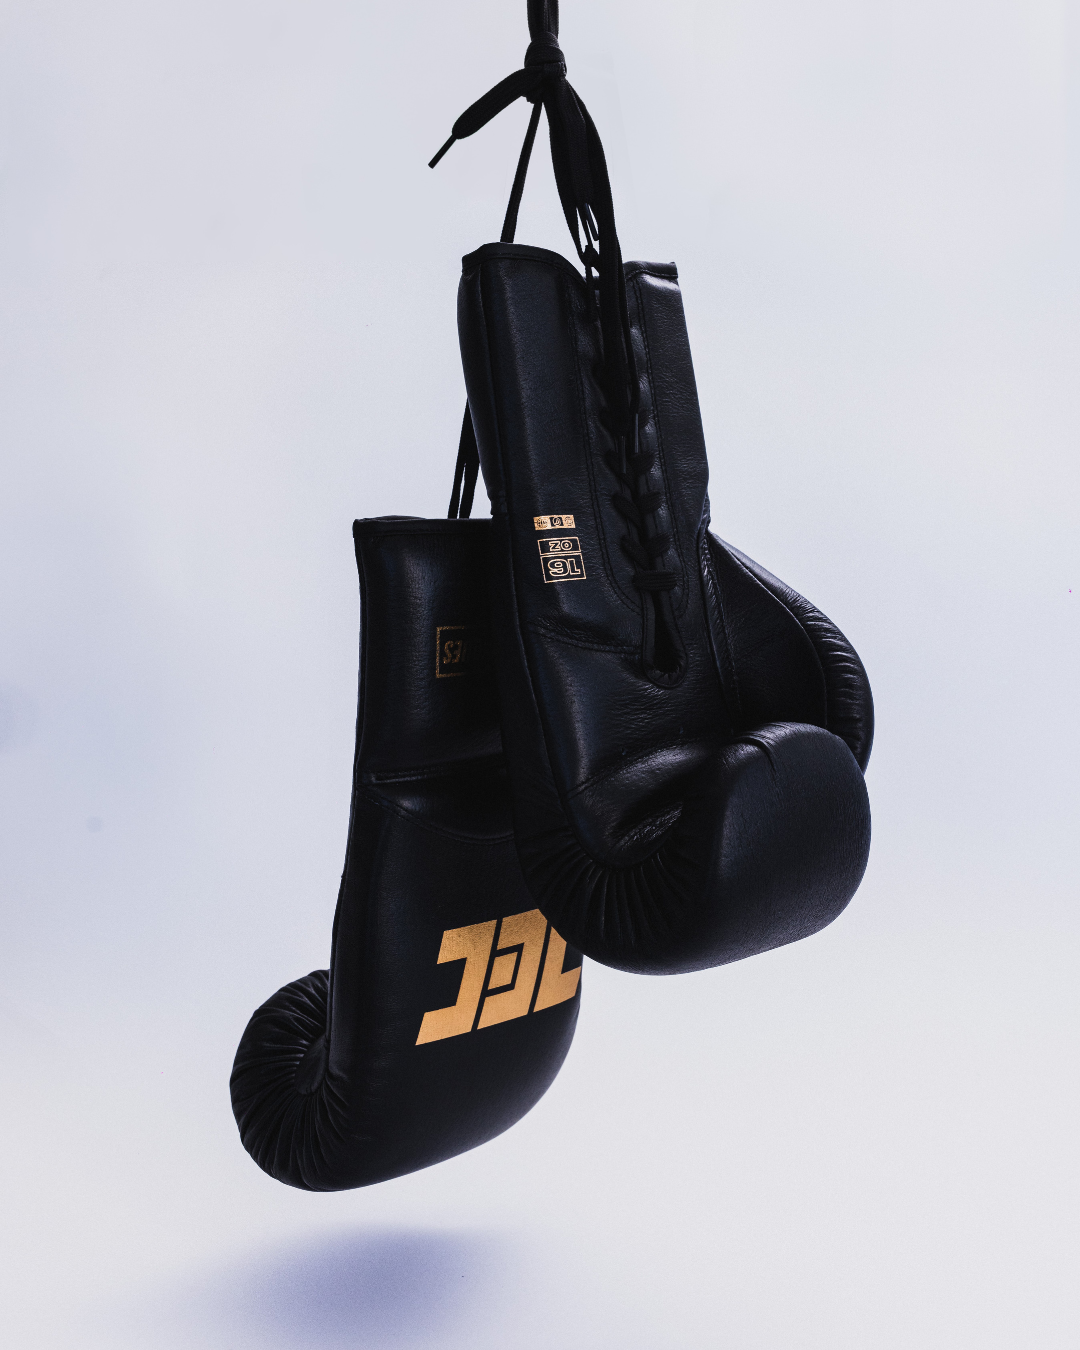 Professional TEC Lace-Up Boxing Gloves